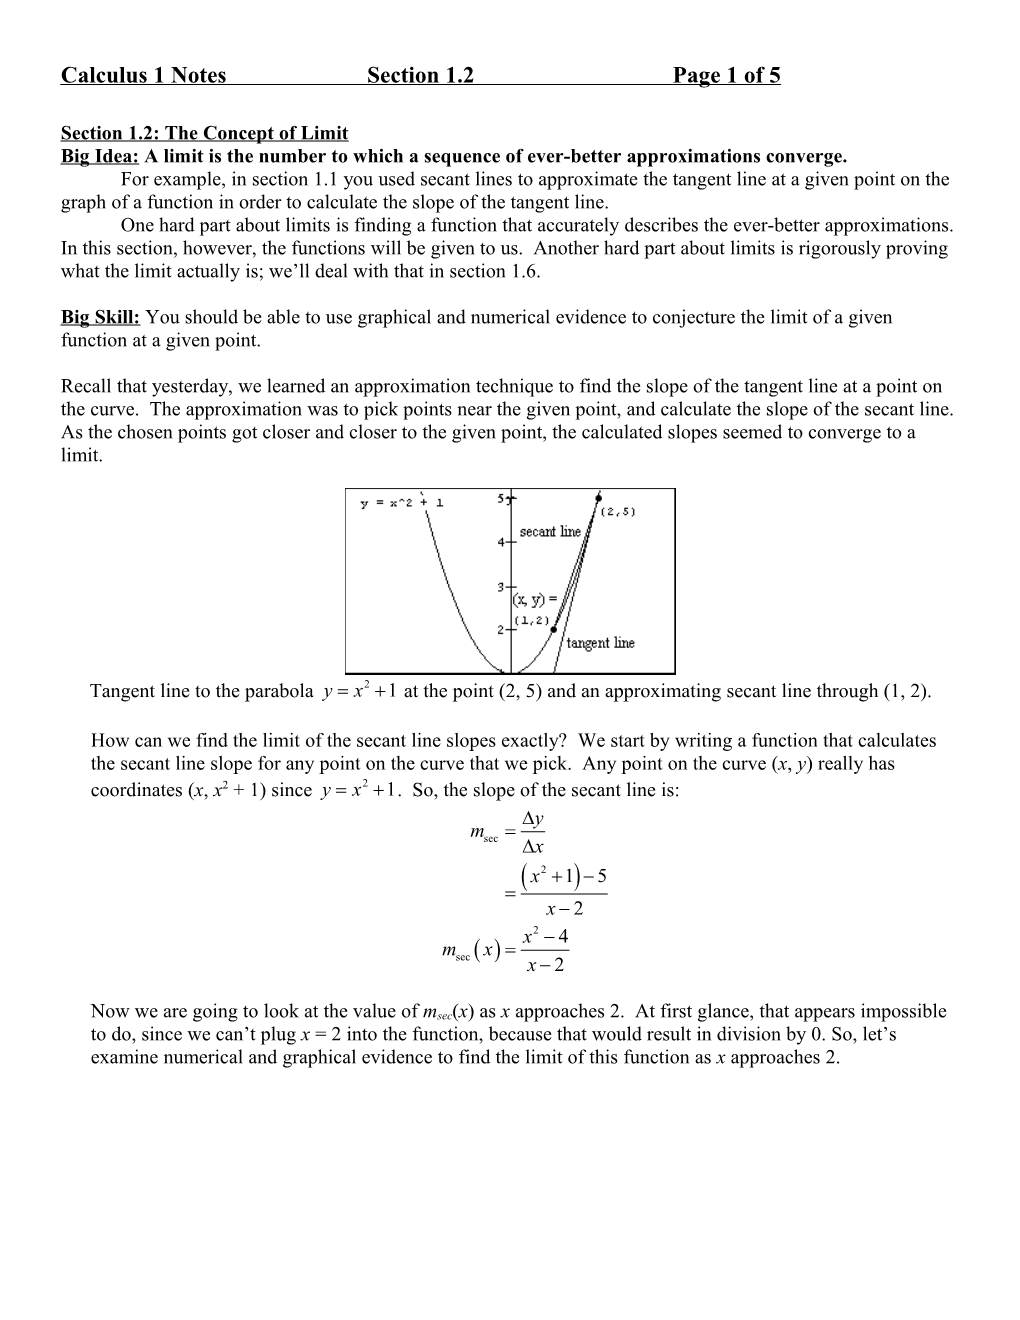 Calculus 1 Lectue Notes, Section 1.2